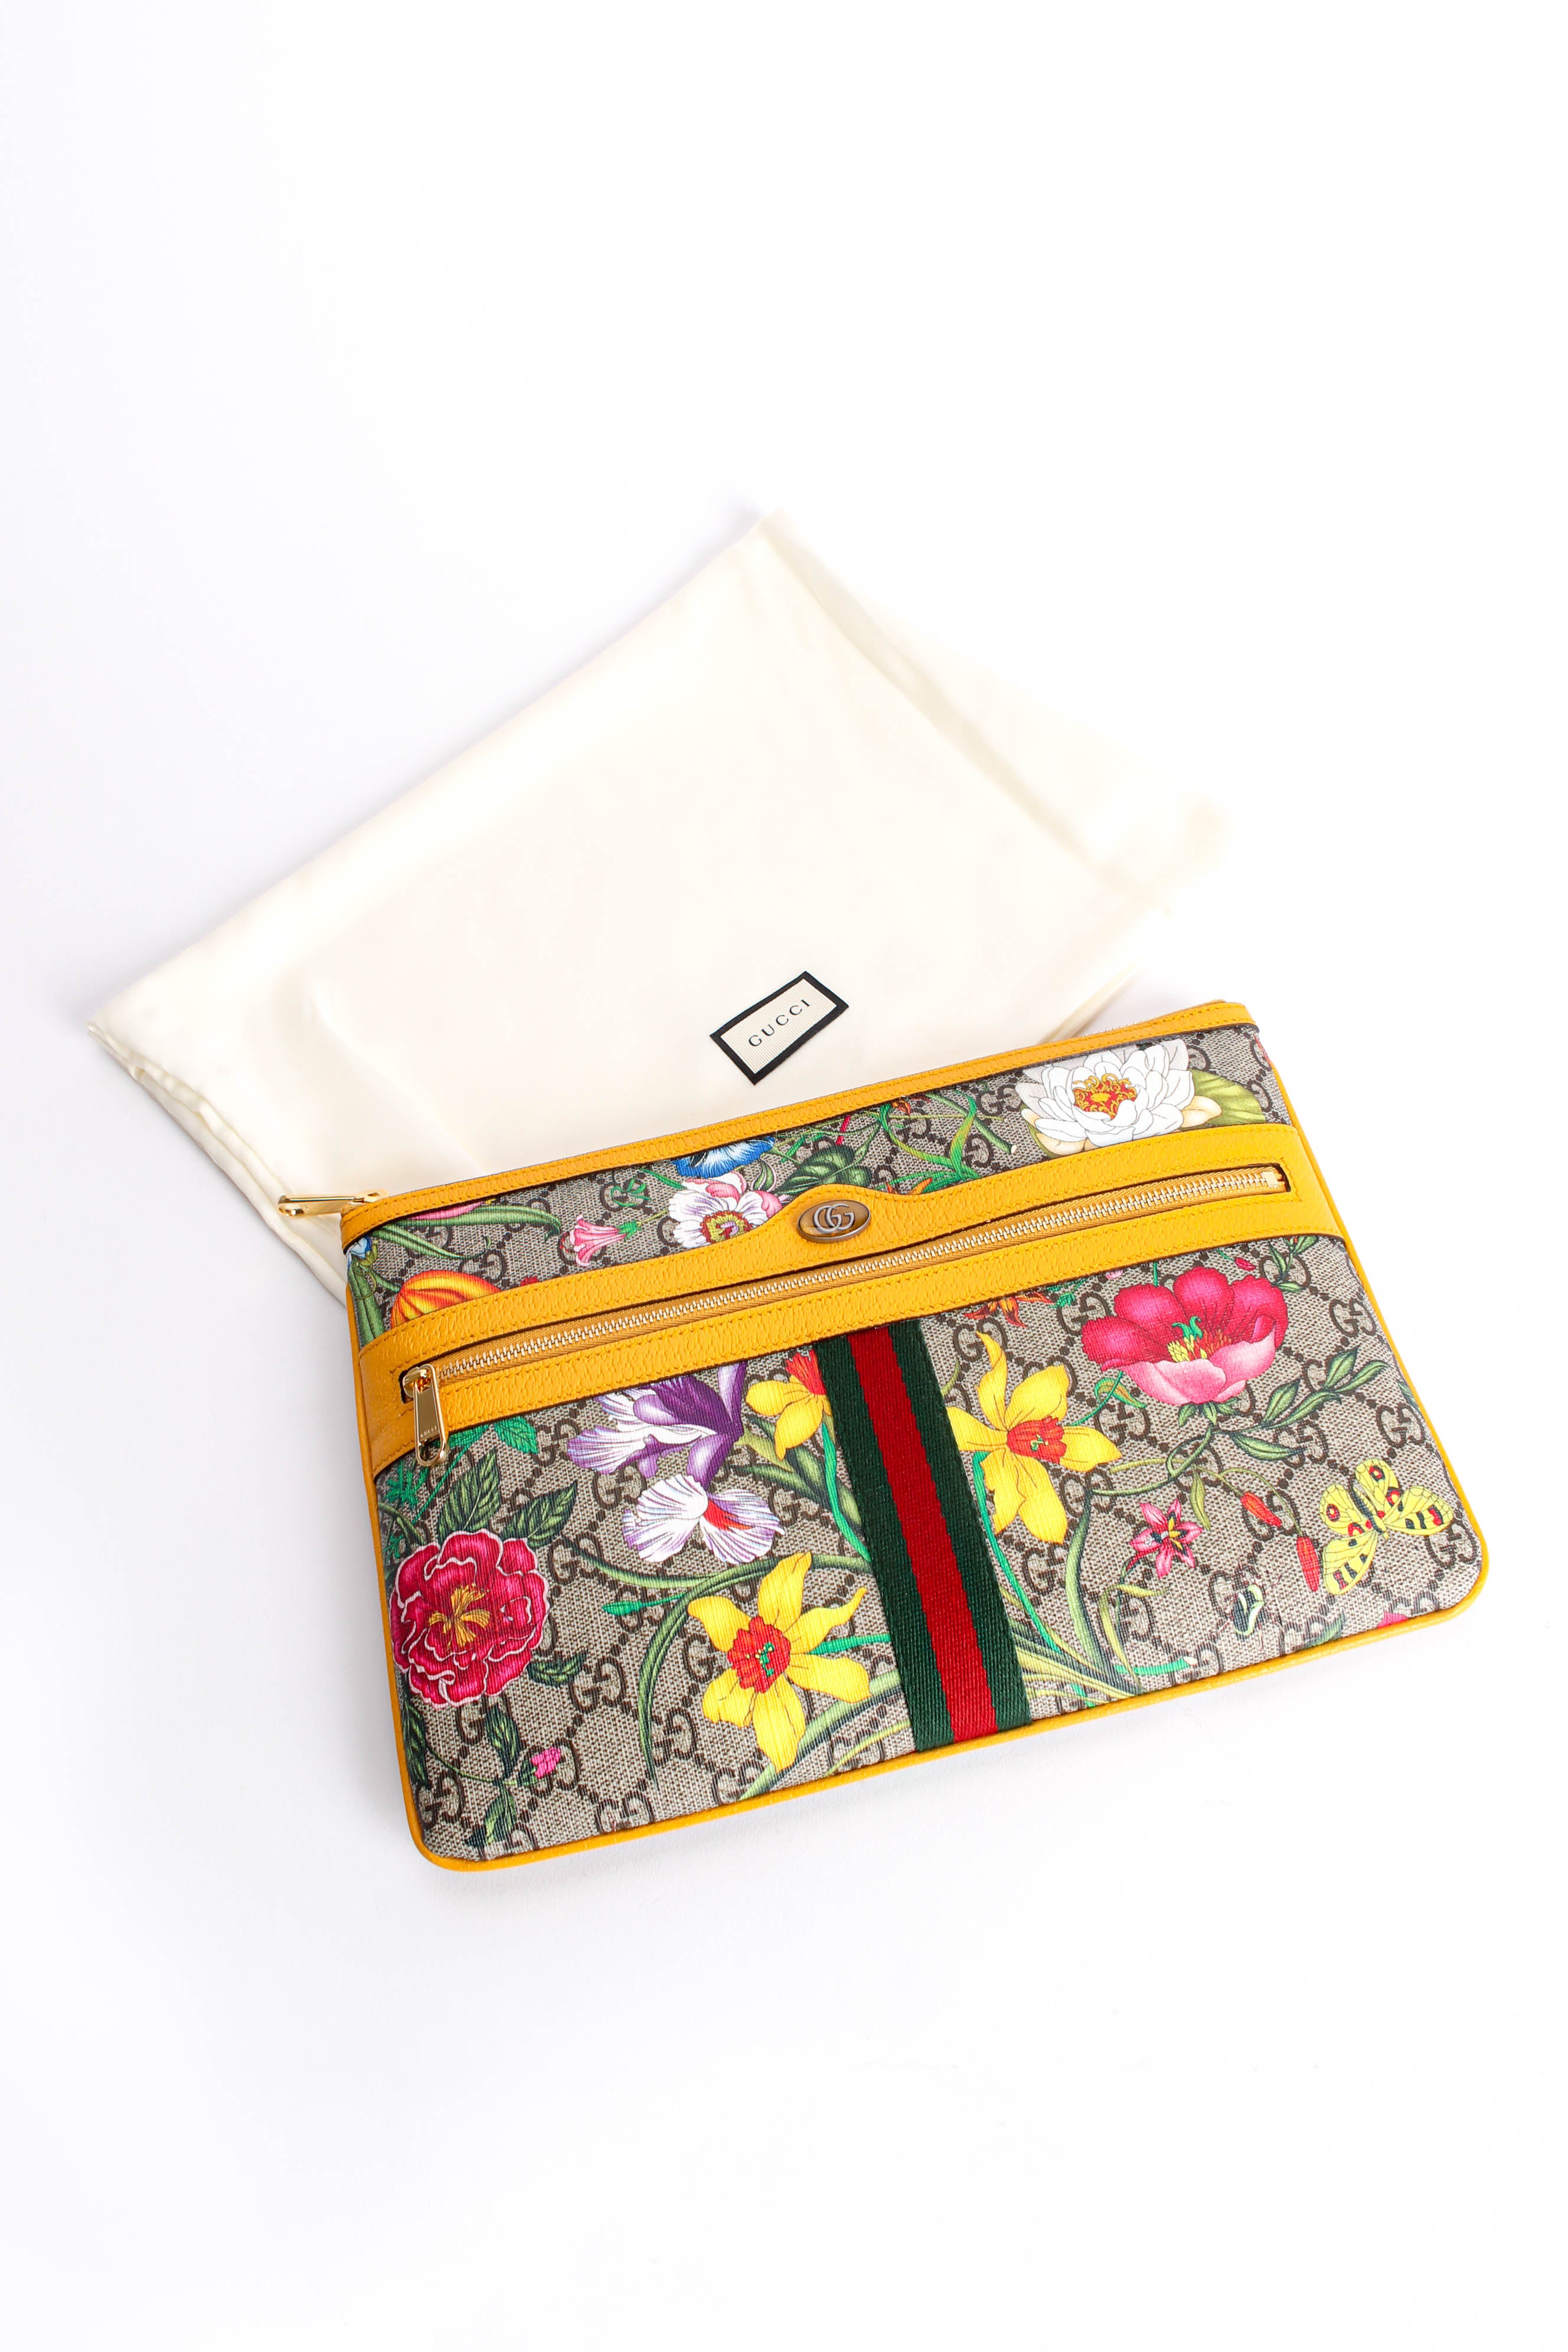 2019 Resort Gift Giving Ophidia Supreme GG Flora Pouch with dustbag at Recess Los Angeles